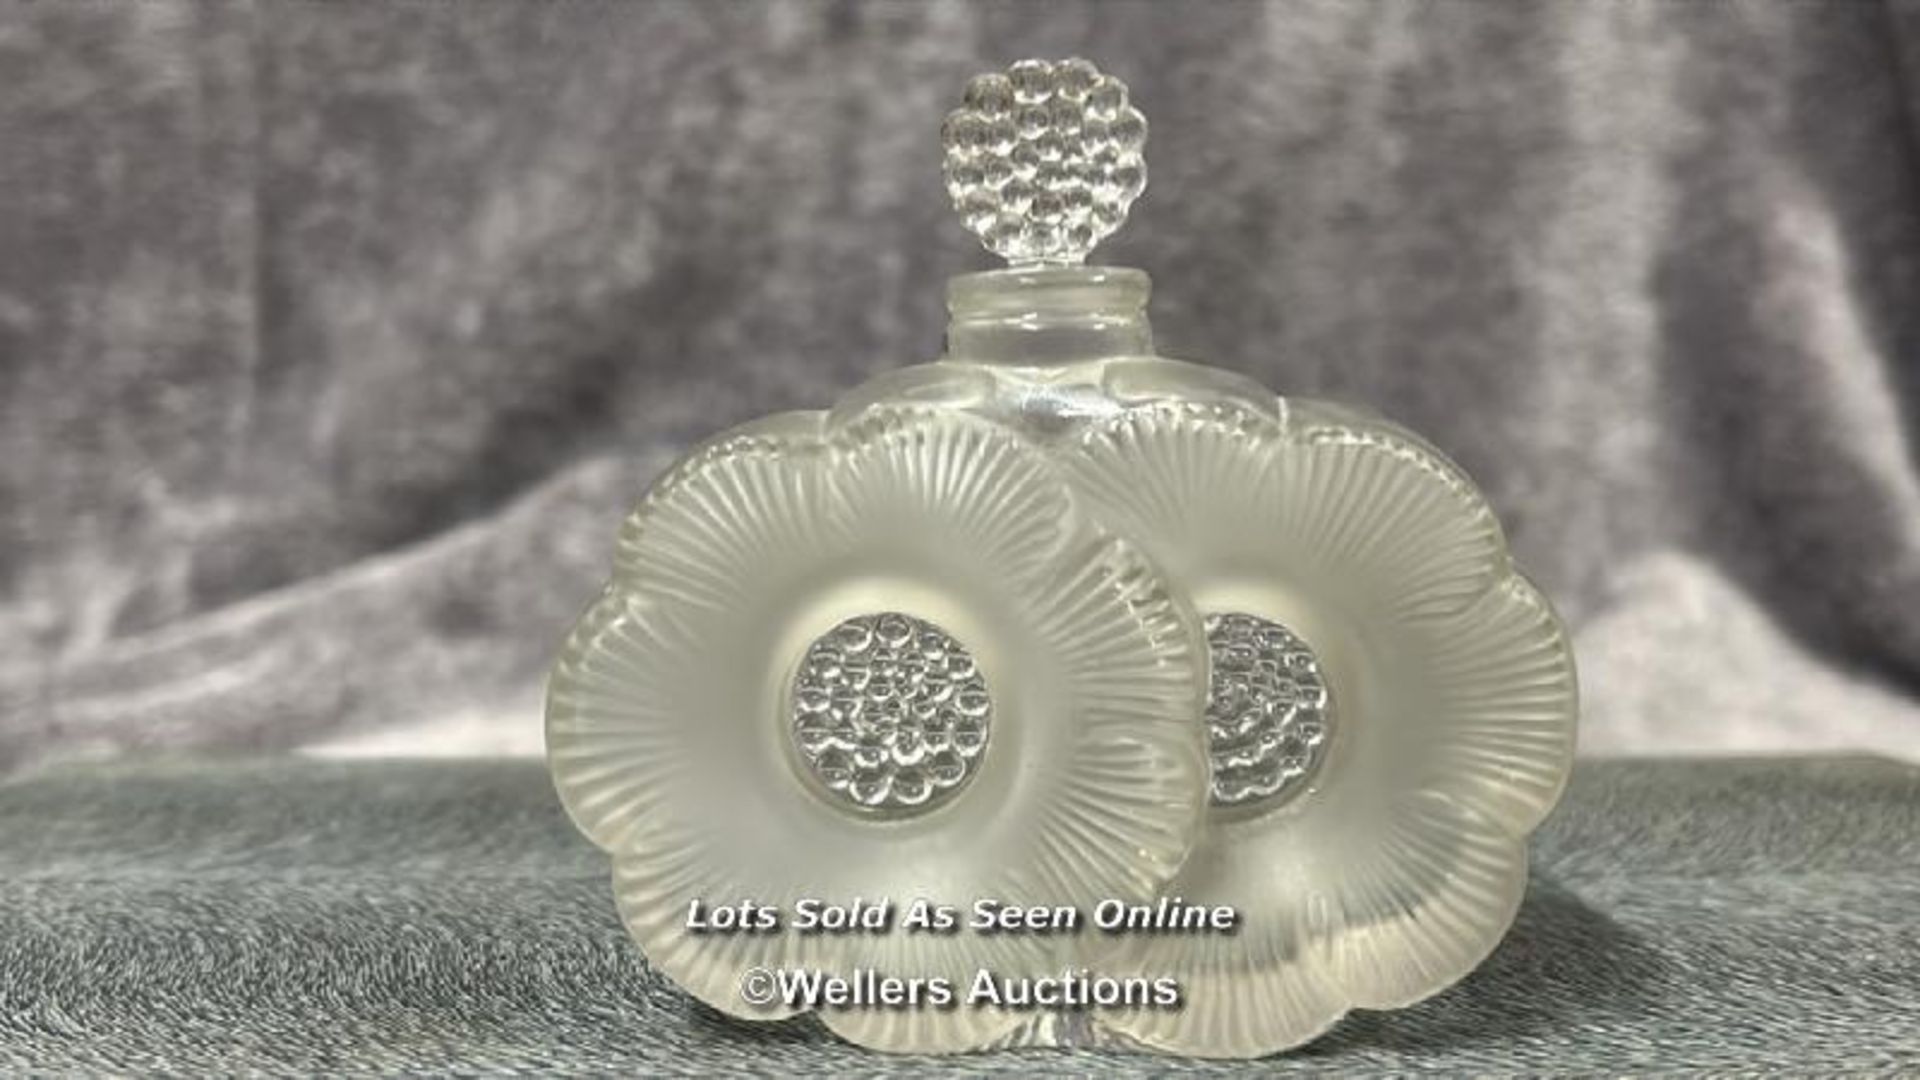 Small Lalique 'Two Flowers' perfume bottle (stopper does not come out) with a Lalique candle - Image 3 of 7